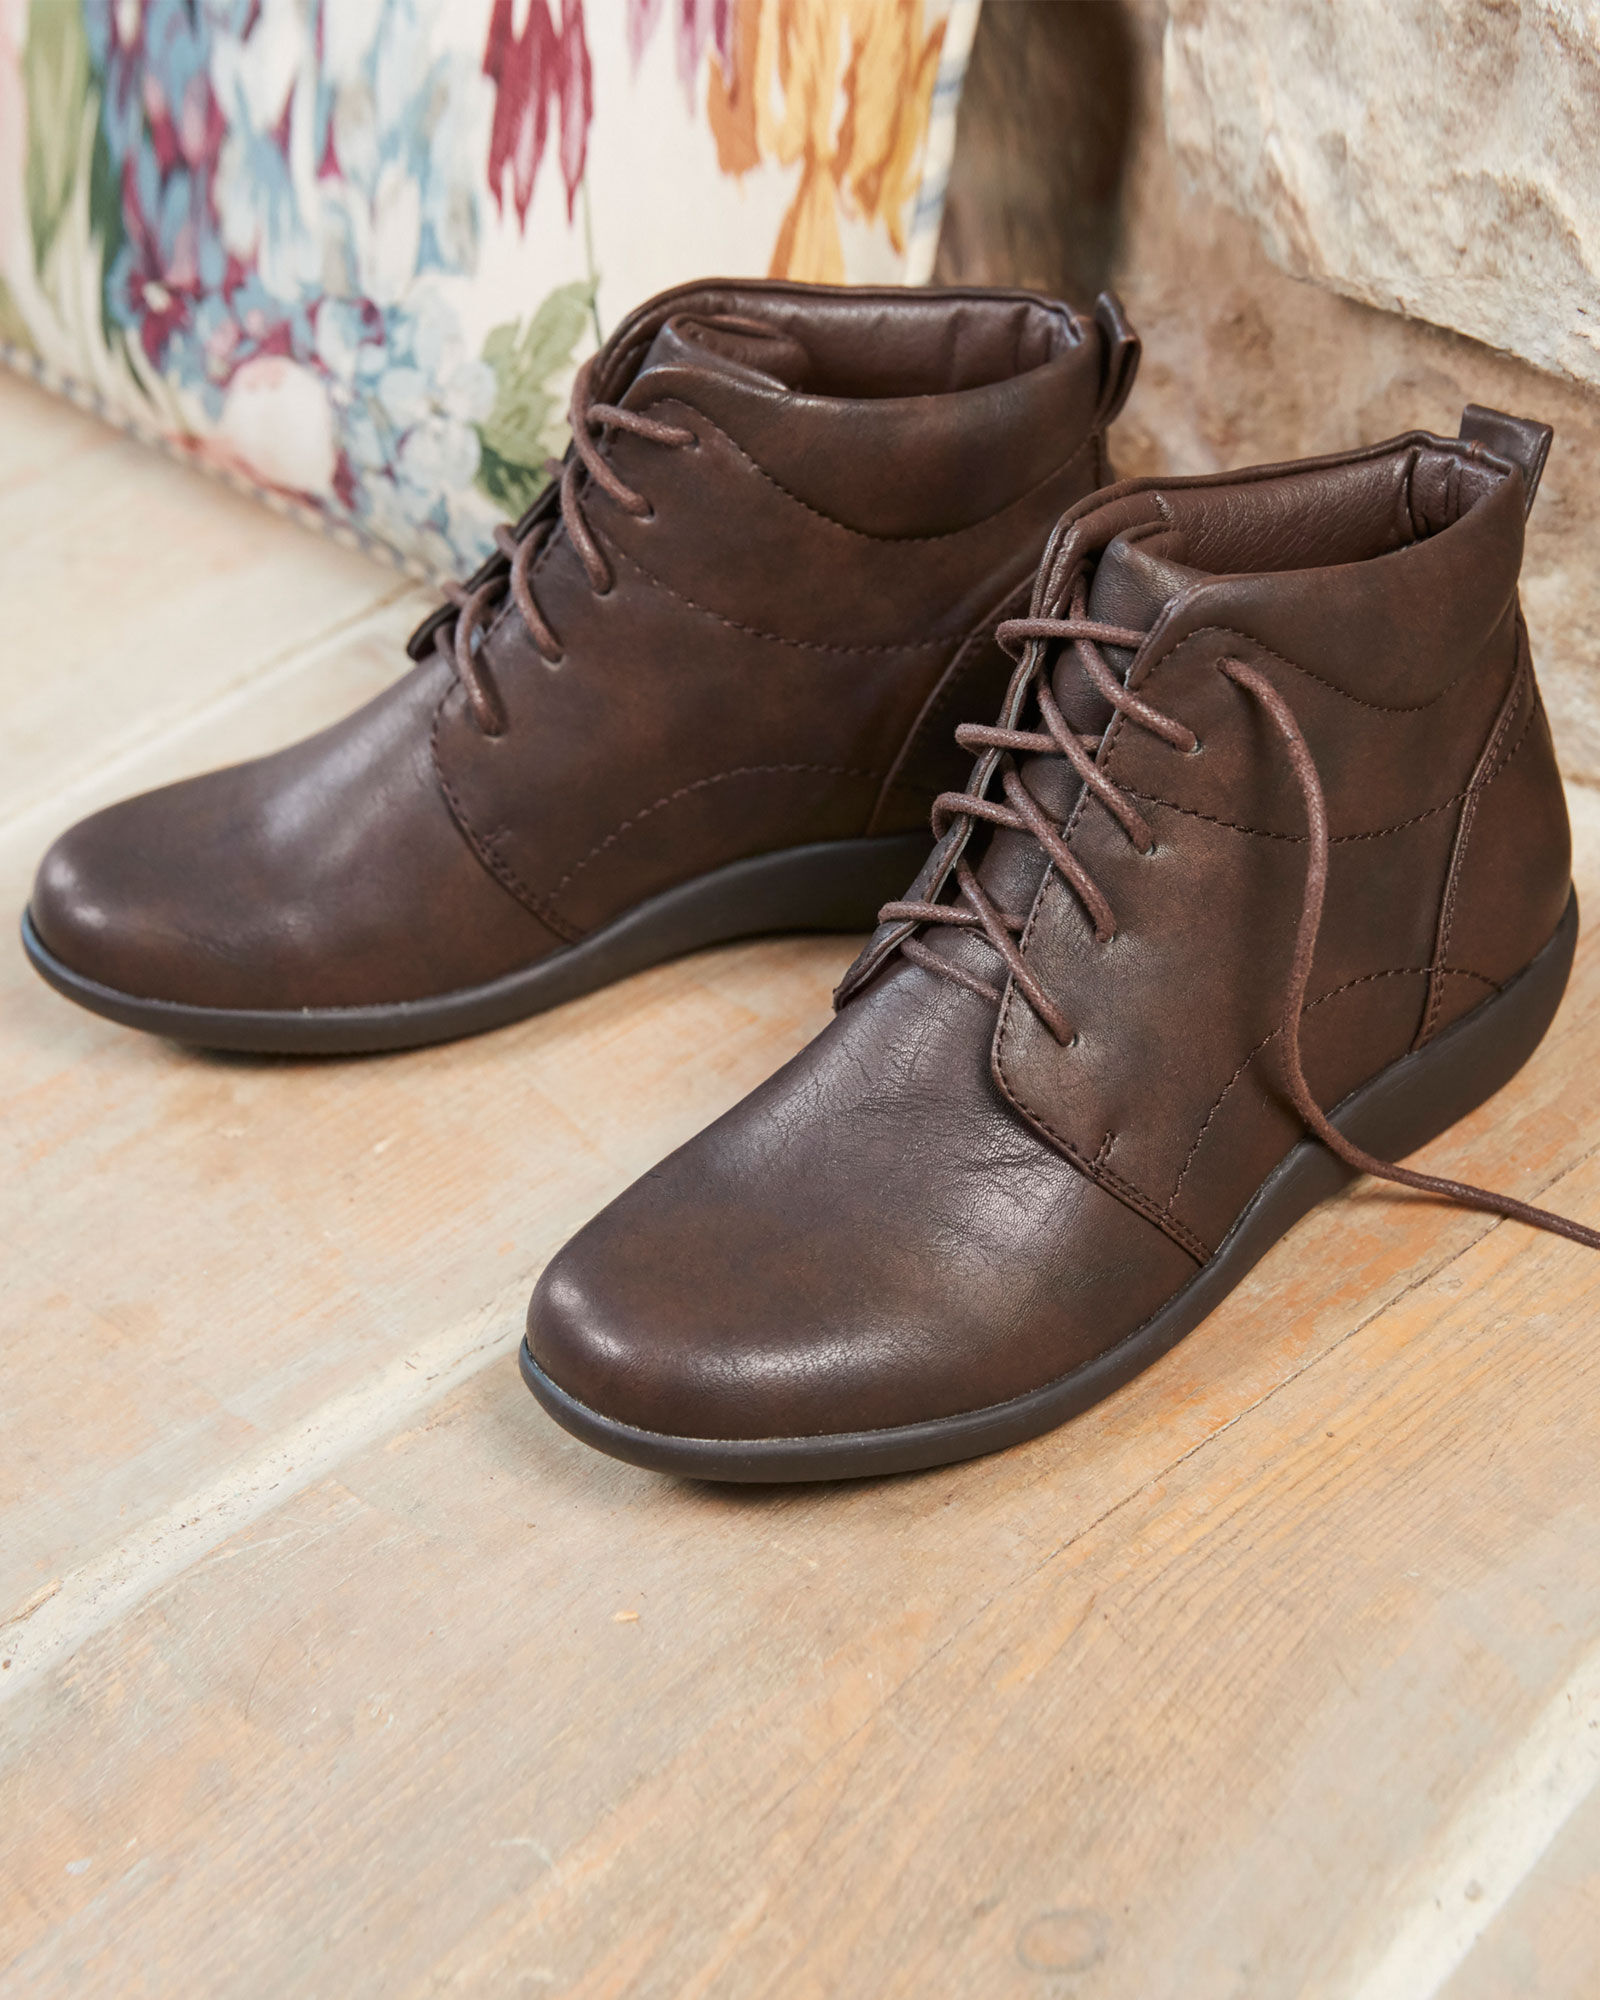 Waterproof Boots | Cotton Traders